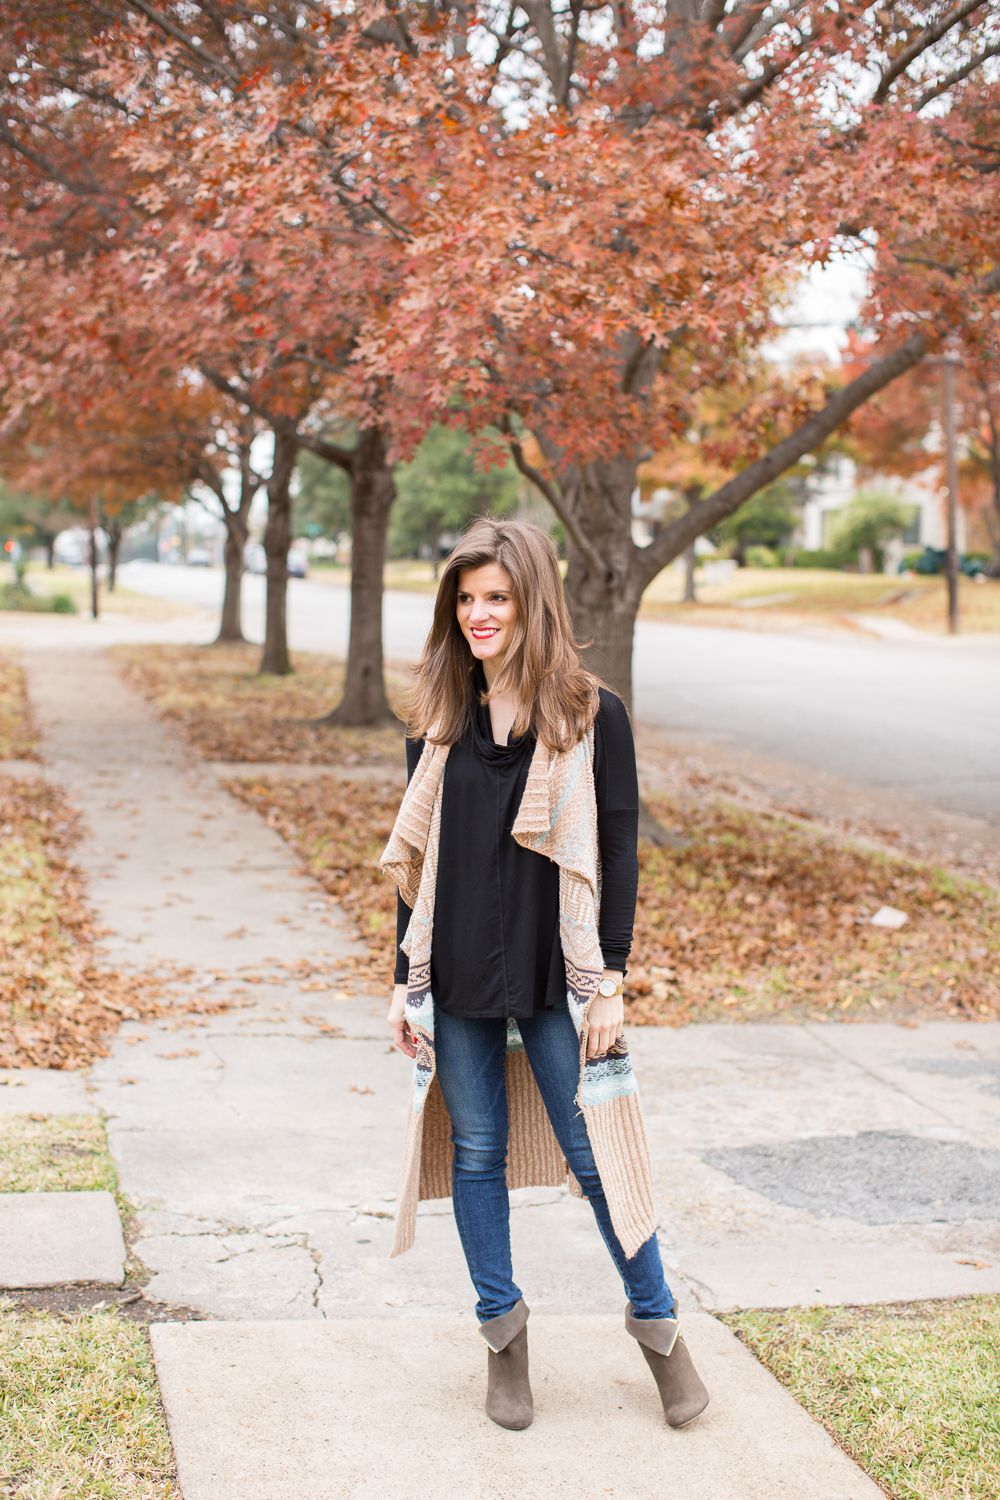 How to Wear a Long Vest with Jeans and Ankle Booties